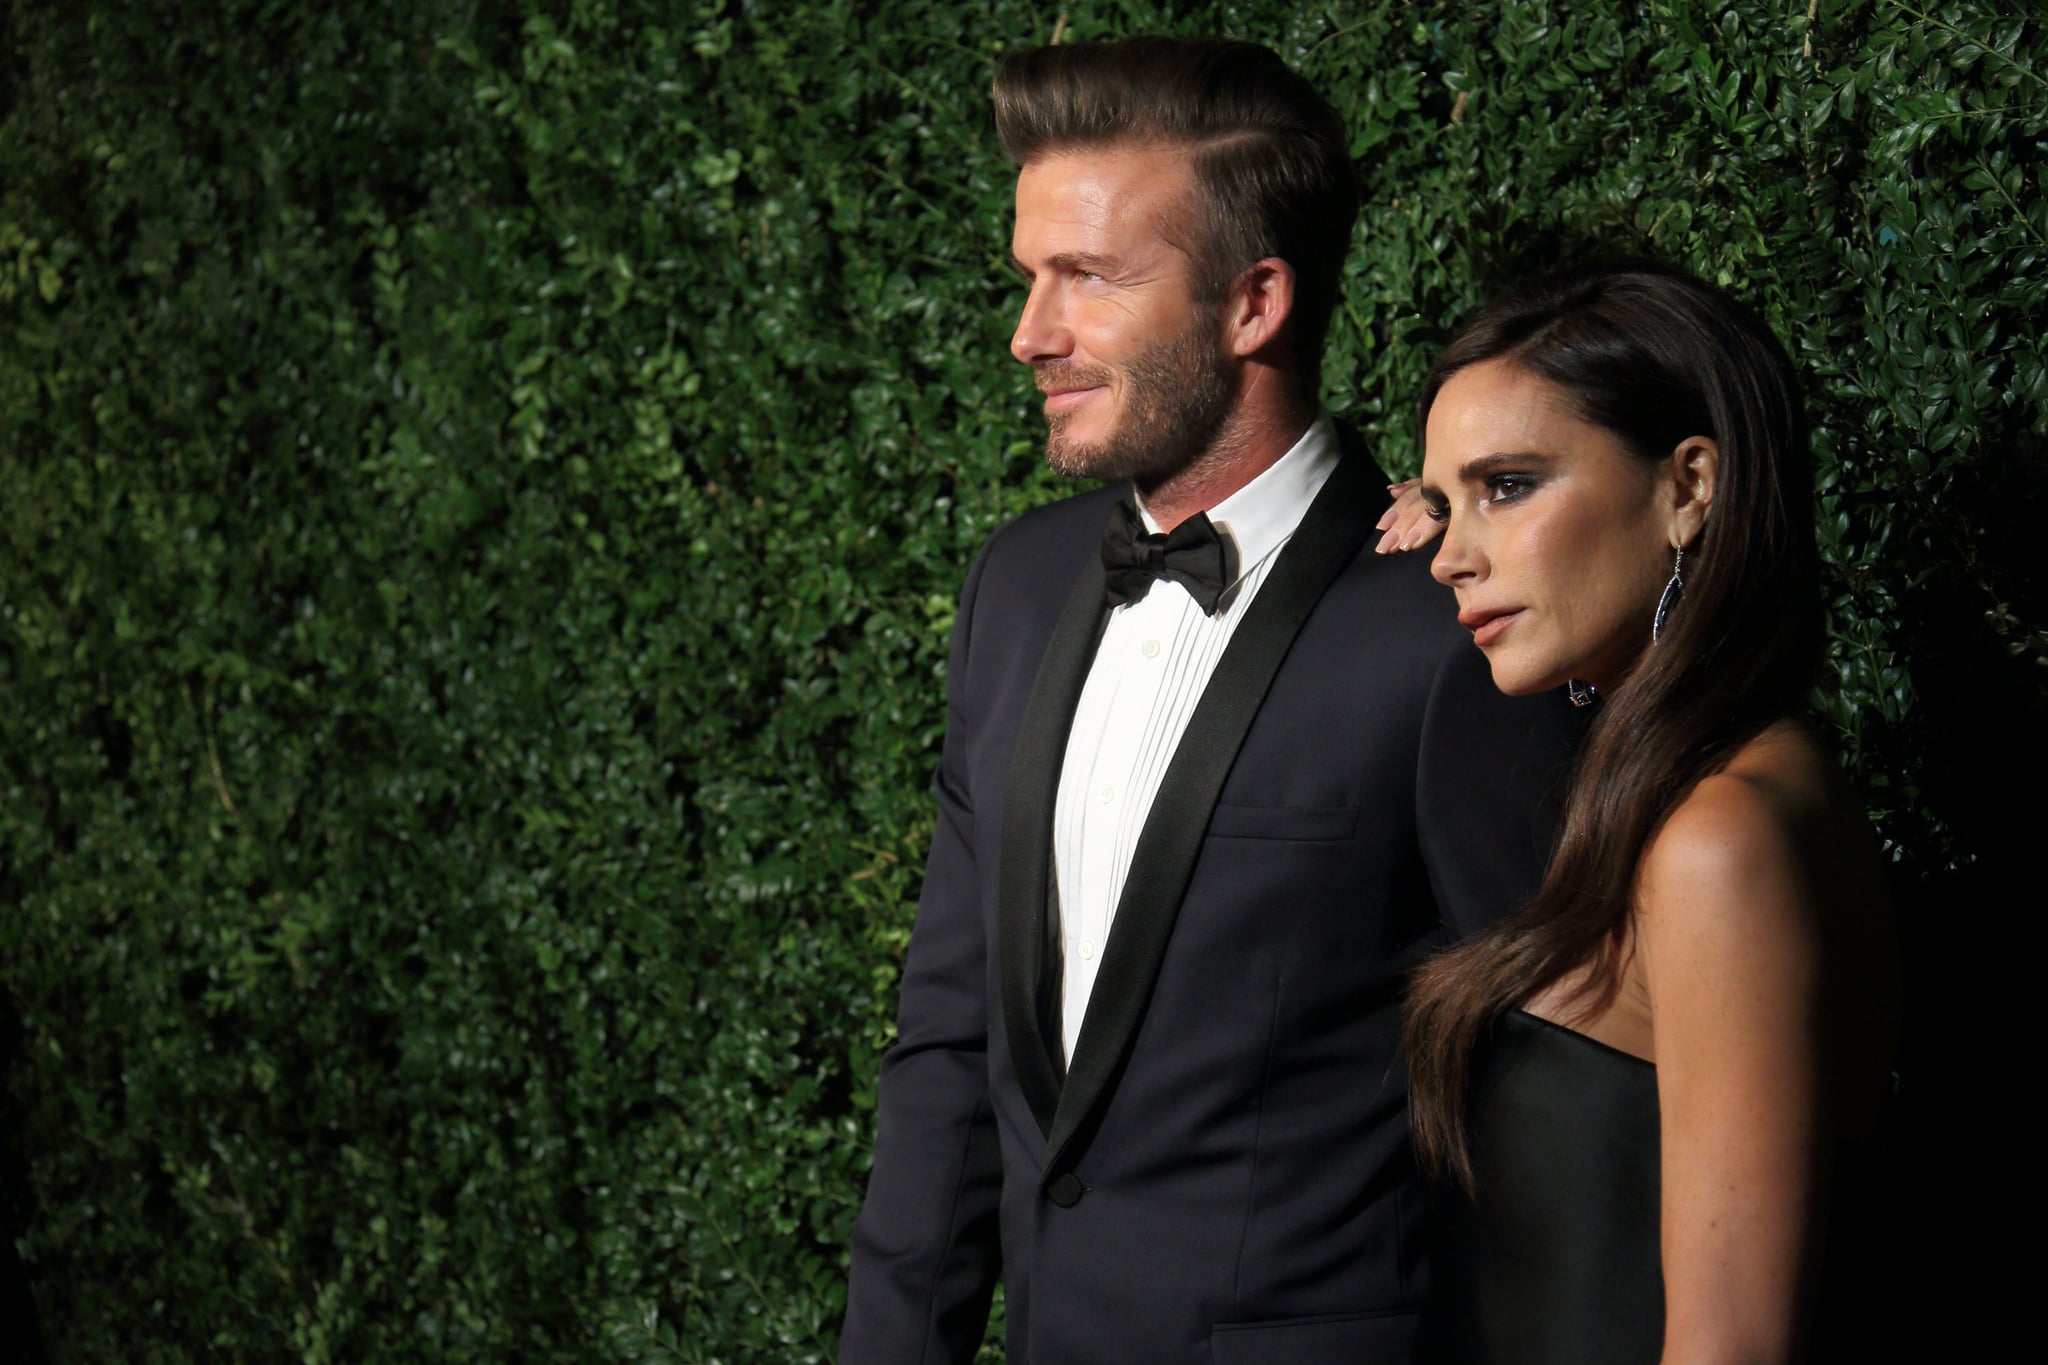 LONDON, ENGLAND - NOVEMBER 30:  David Beckham and Victoria Beckham attend the 60th London Evening Standard Theatre Awards at London Palladium on November 30, 2014 in London, England.  (Photo by Mike Marsland/WireImage)